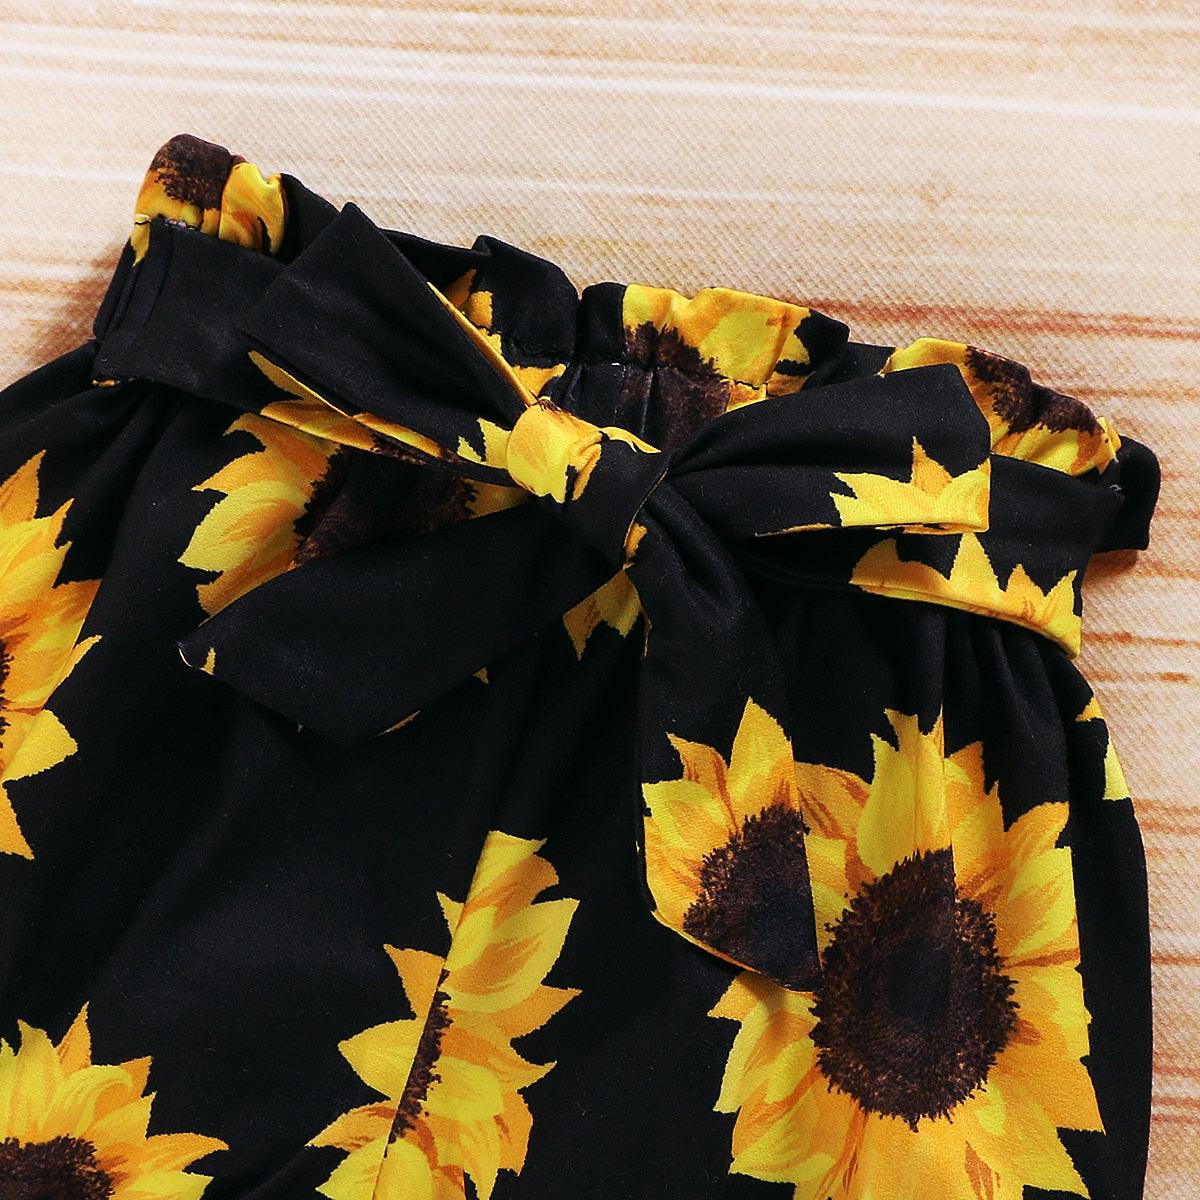 Short Sleeve Sunflower Outfit - Shop Baby Boutiques 